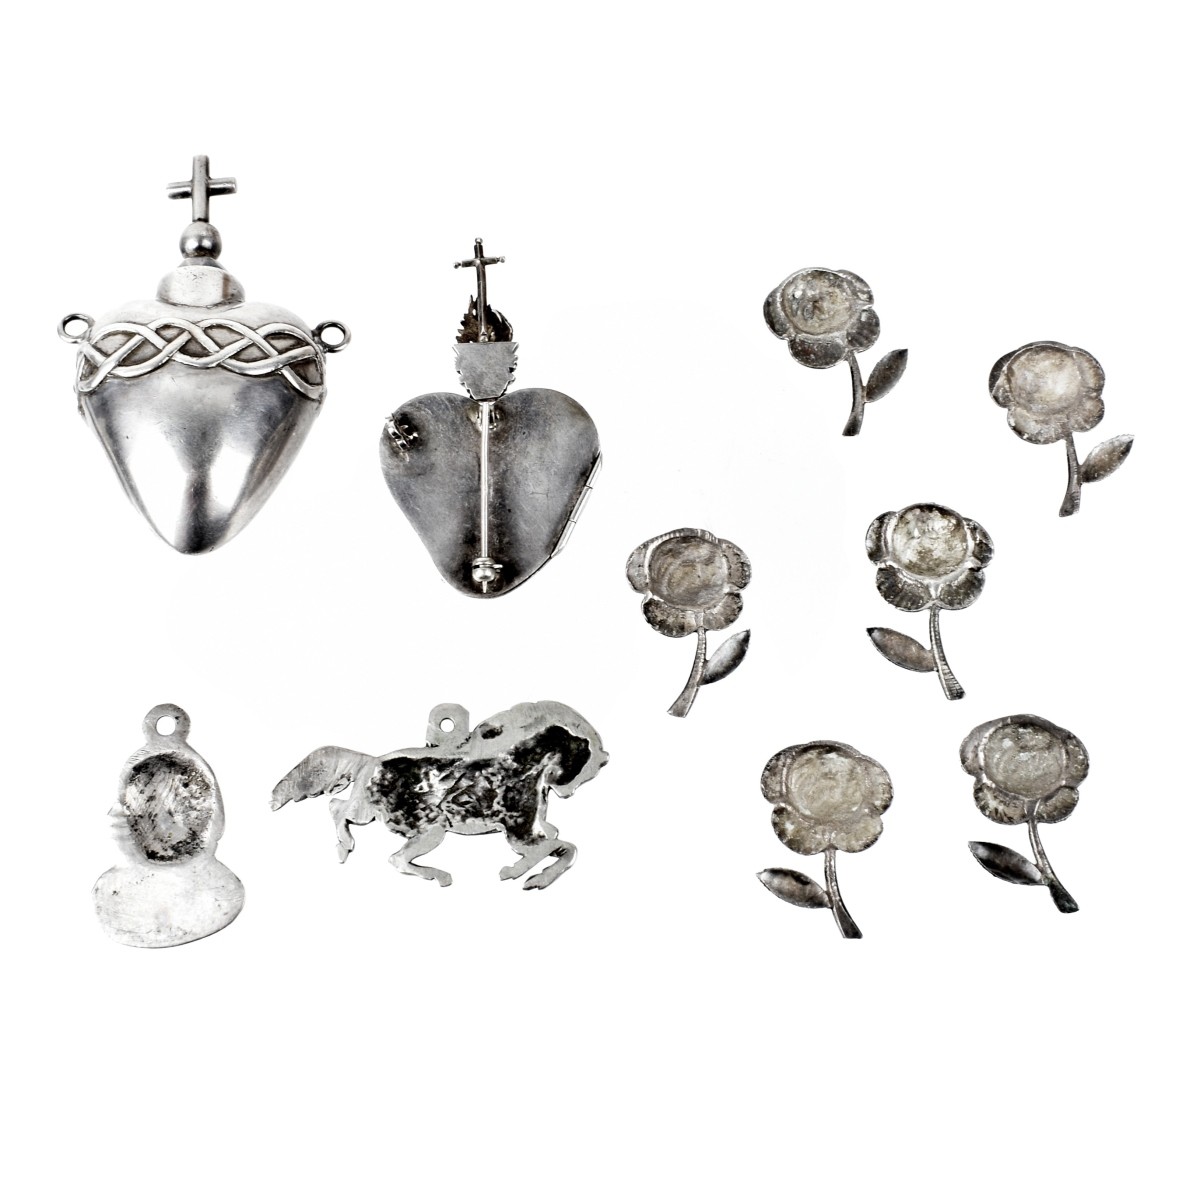 Spanish Colonial Silver Objects